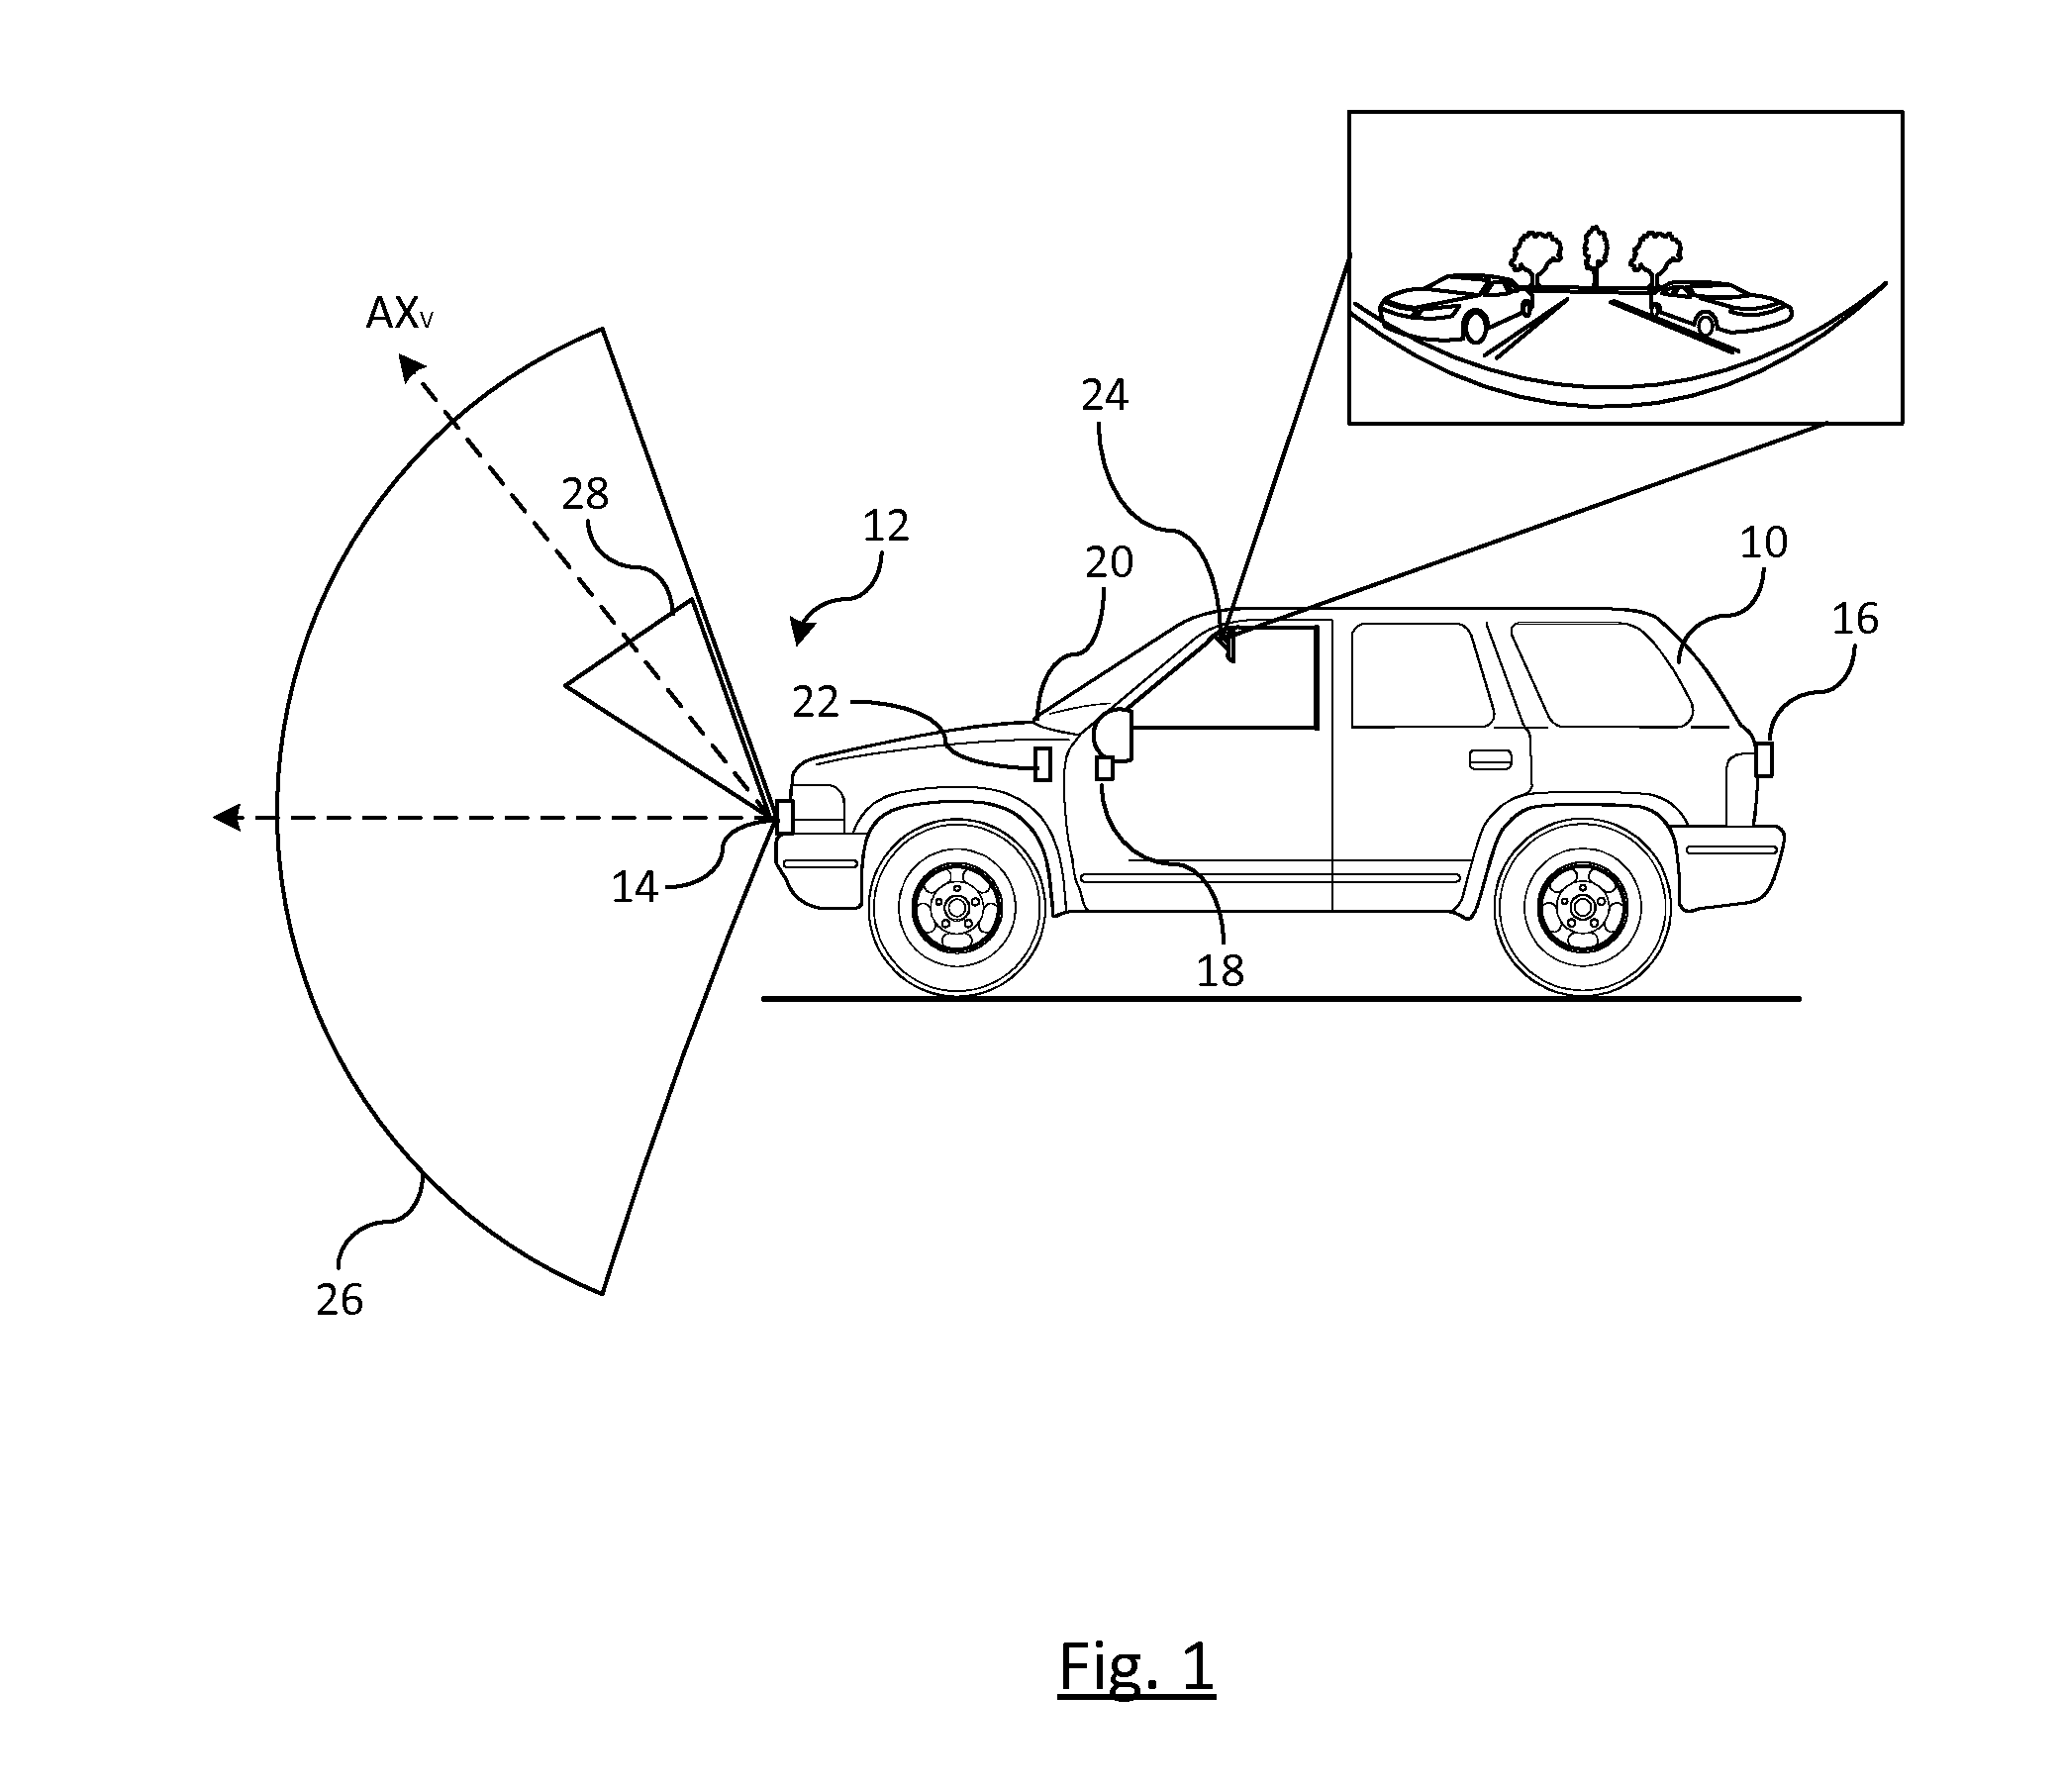 Vision-based object sensing and highlighting in vehicle image display systems